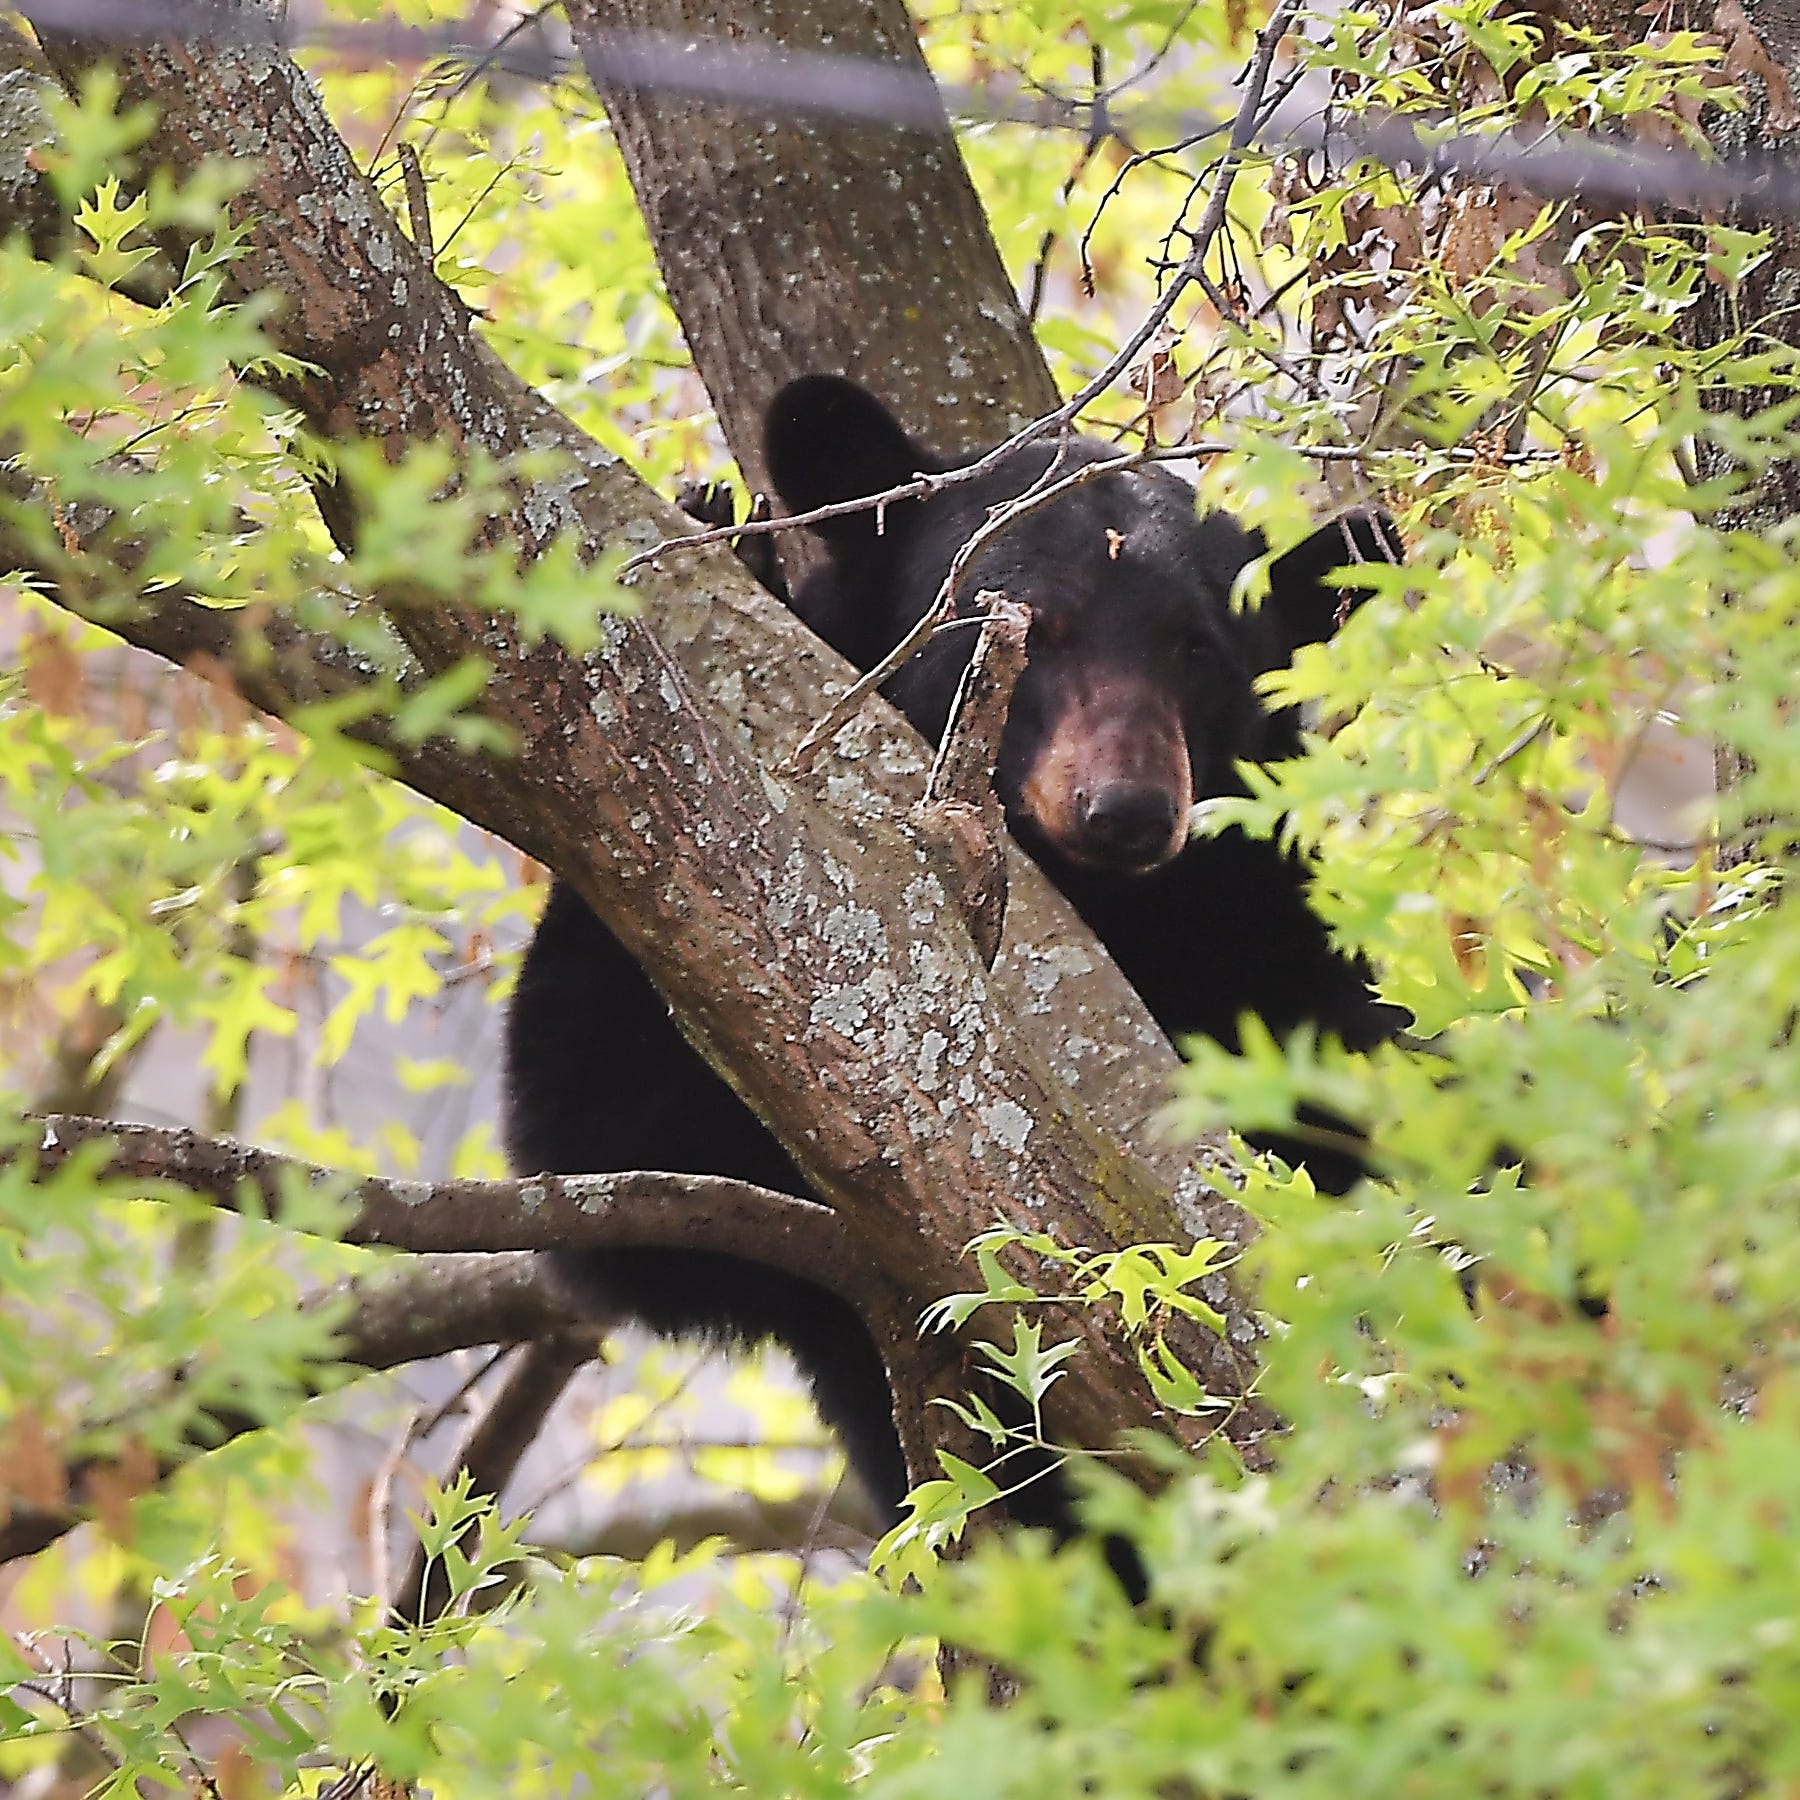 A black bear was spotted stuck in a tree outside First Presbyterian Church Thursday morning in downtown Spartanburg. A crowd quickly formed outside the church, located on the corner of East Main Street and Chestnut Street, to observe the commotion.